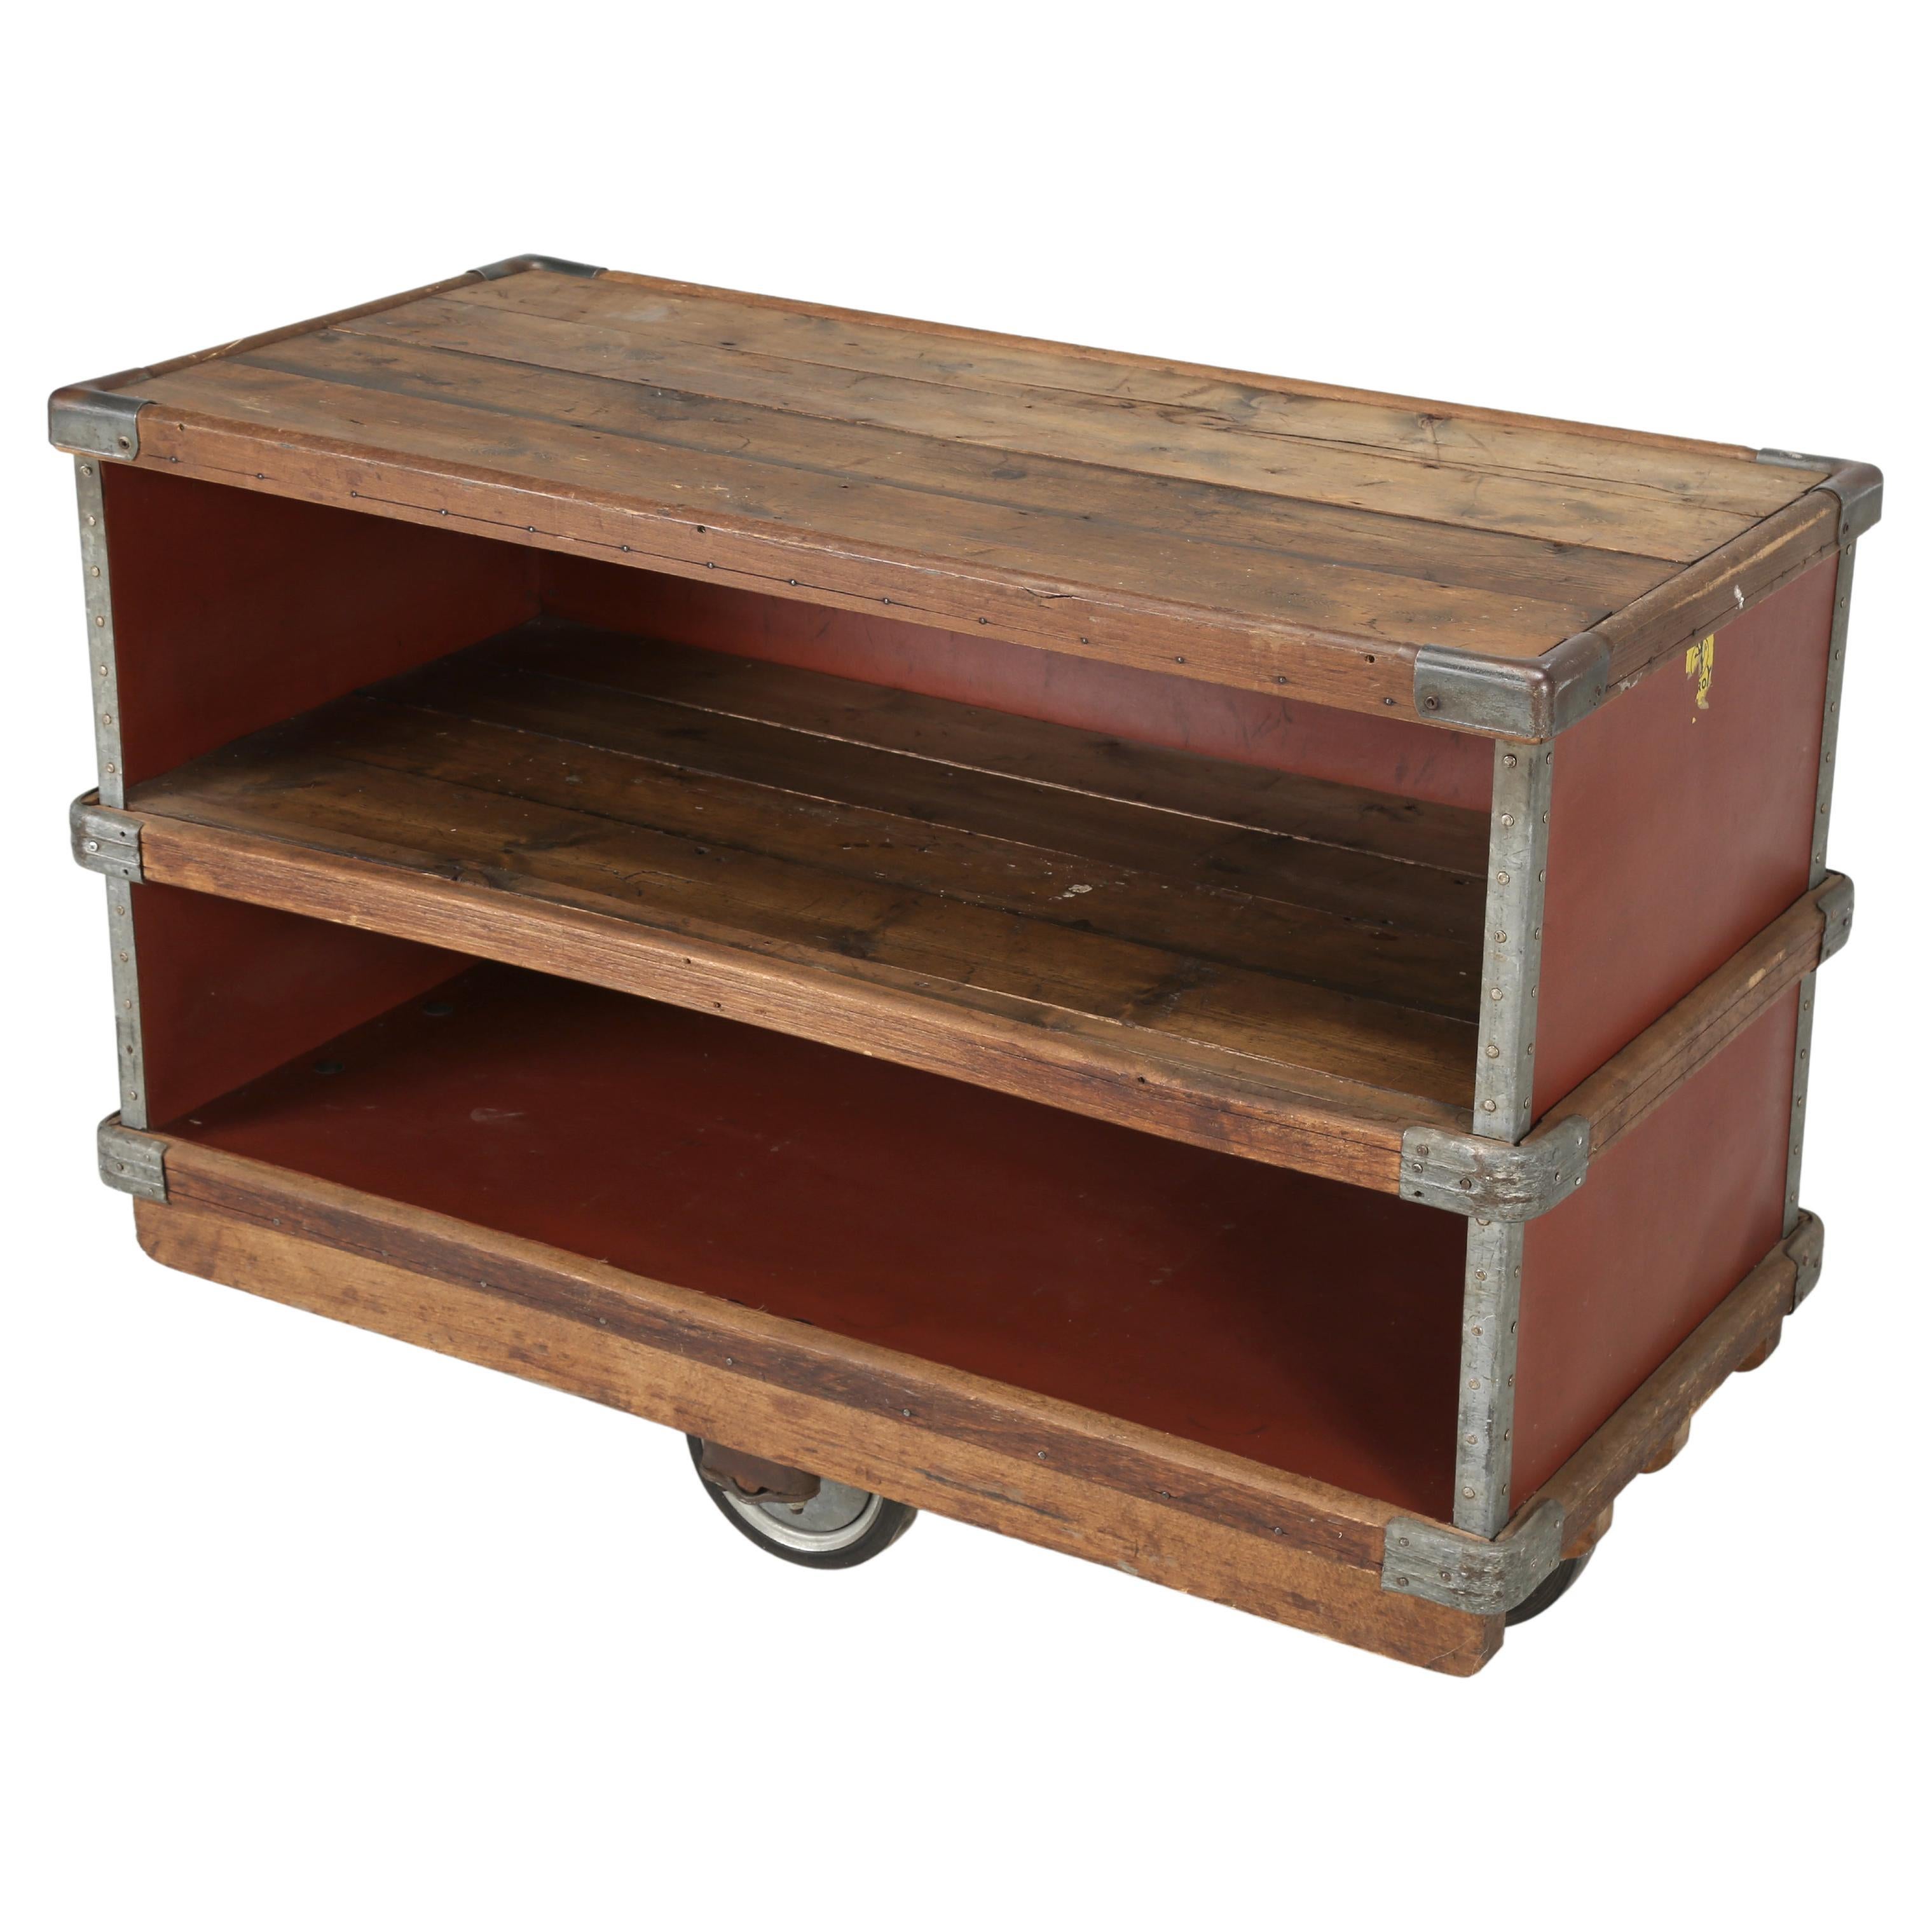 French Repurposed Mobile Suroy Storage Container into a Bar Cart or Office Cart